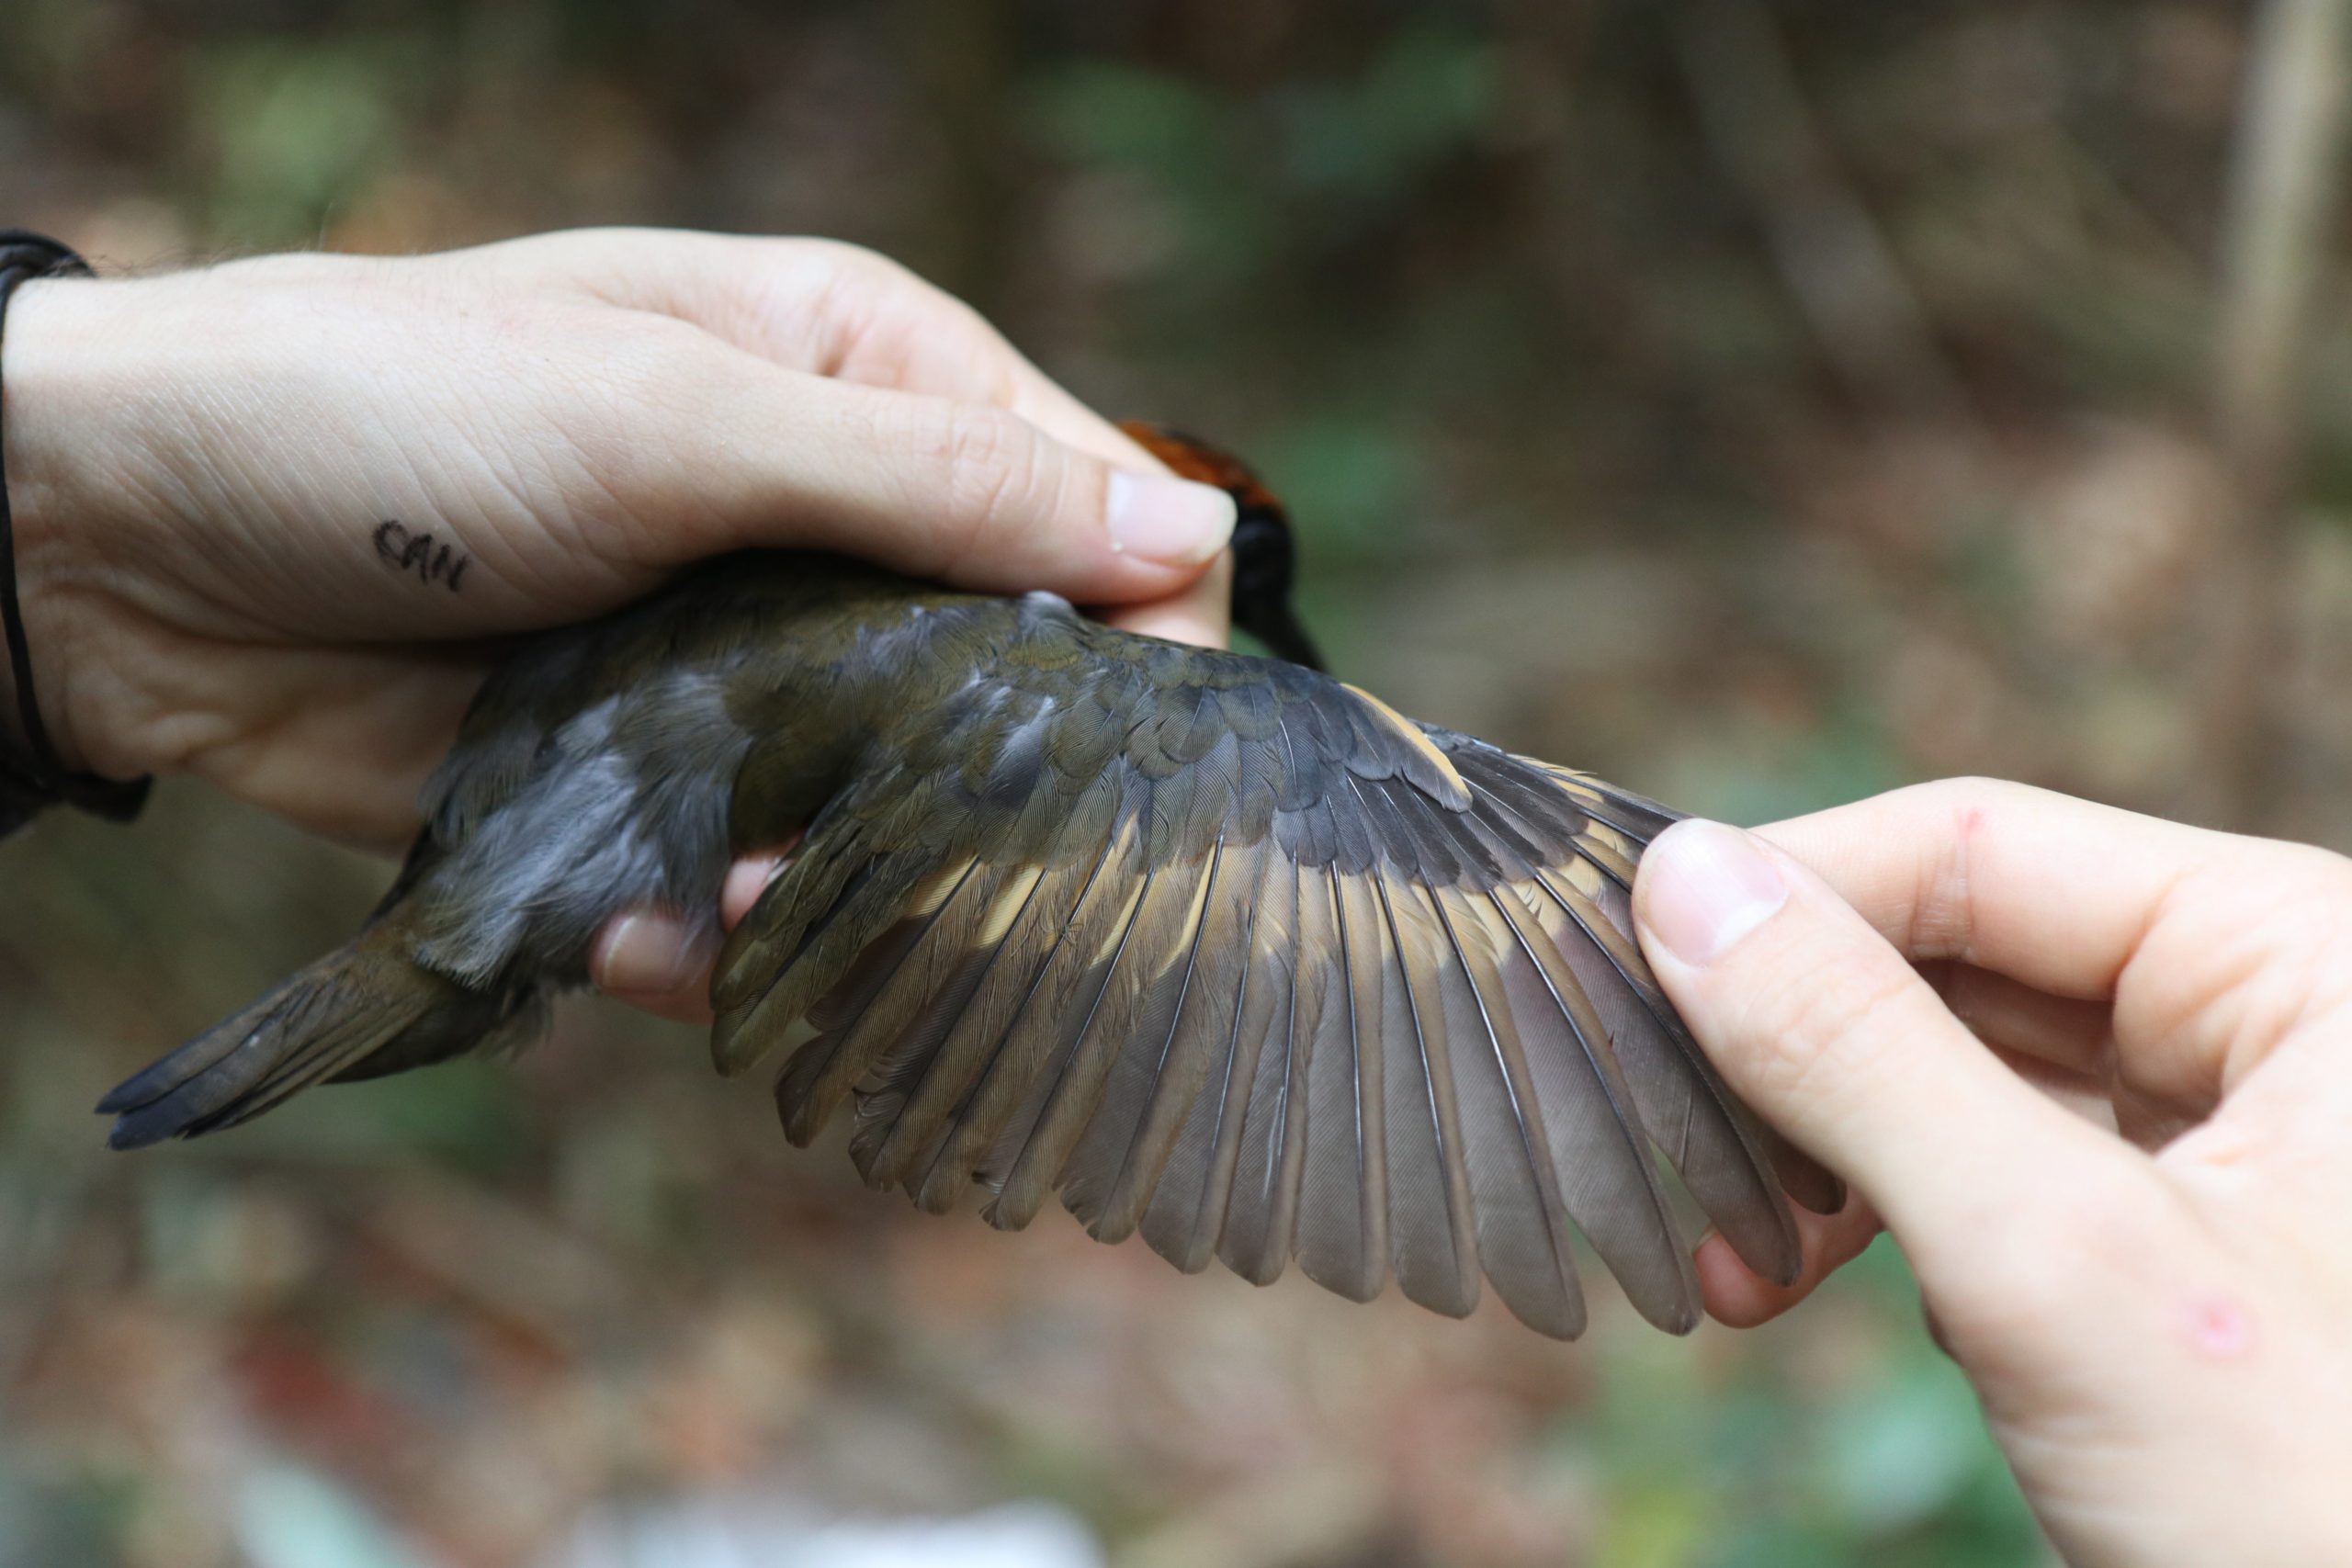 Study co-author Cameron Rutt examines the wing of a Rufous-capped Antthrush (Formicarius colma).  (Photo: Vitek Jirinec)